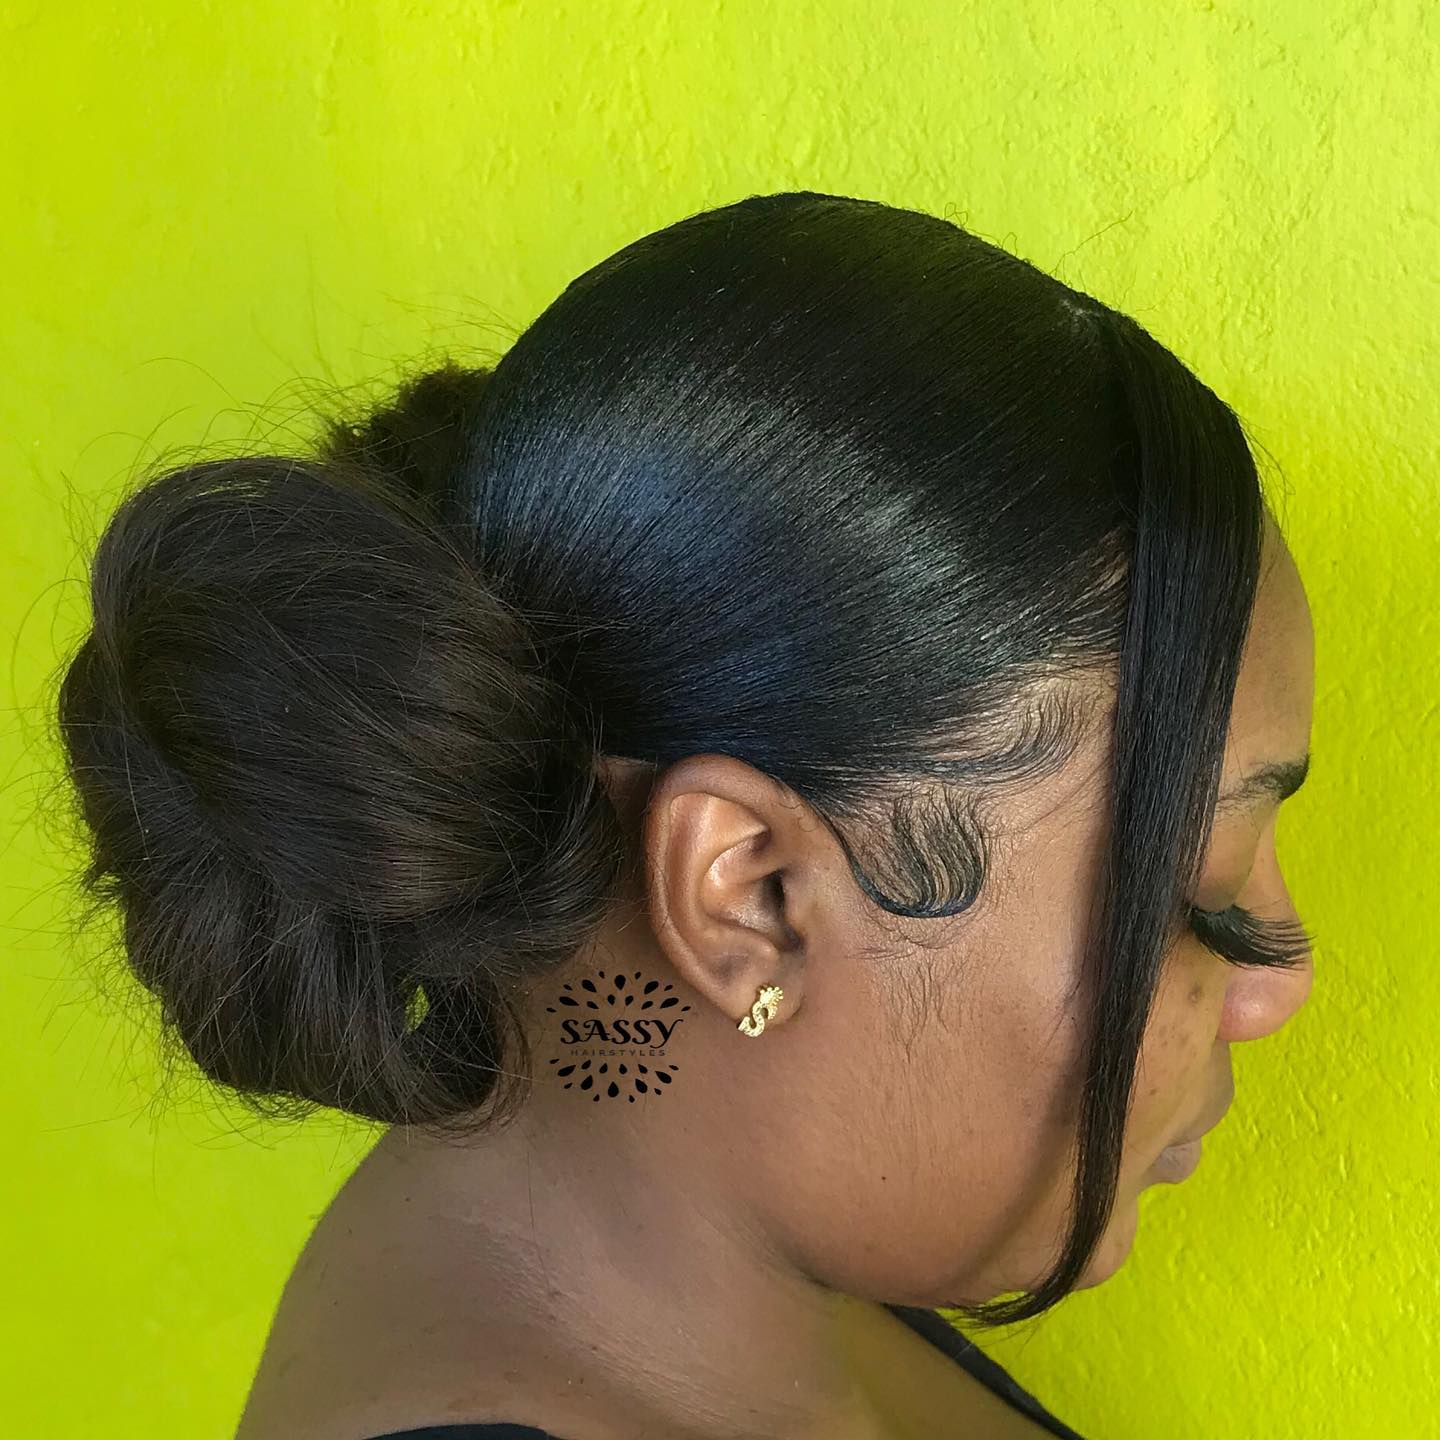 Updo Hairstyle for Black women 5 Black hair updo styles pictures | Black updo hairstyles with curls | black woman braids Updo Hairstyles for Black Women